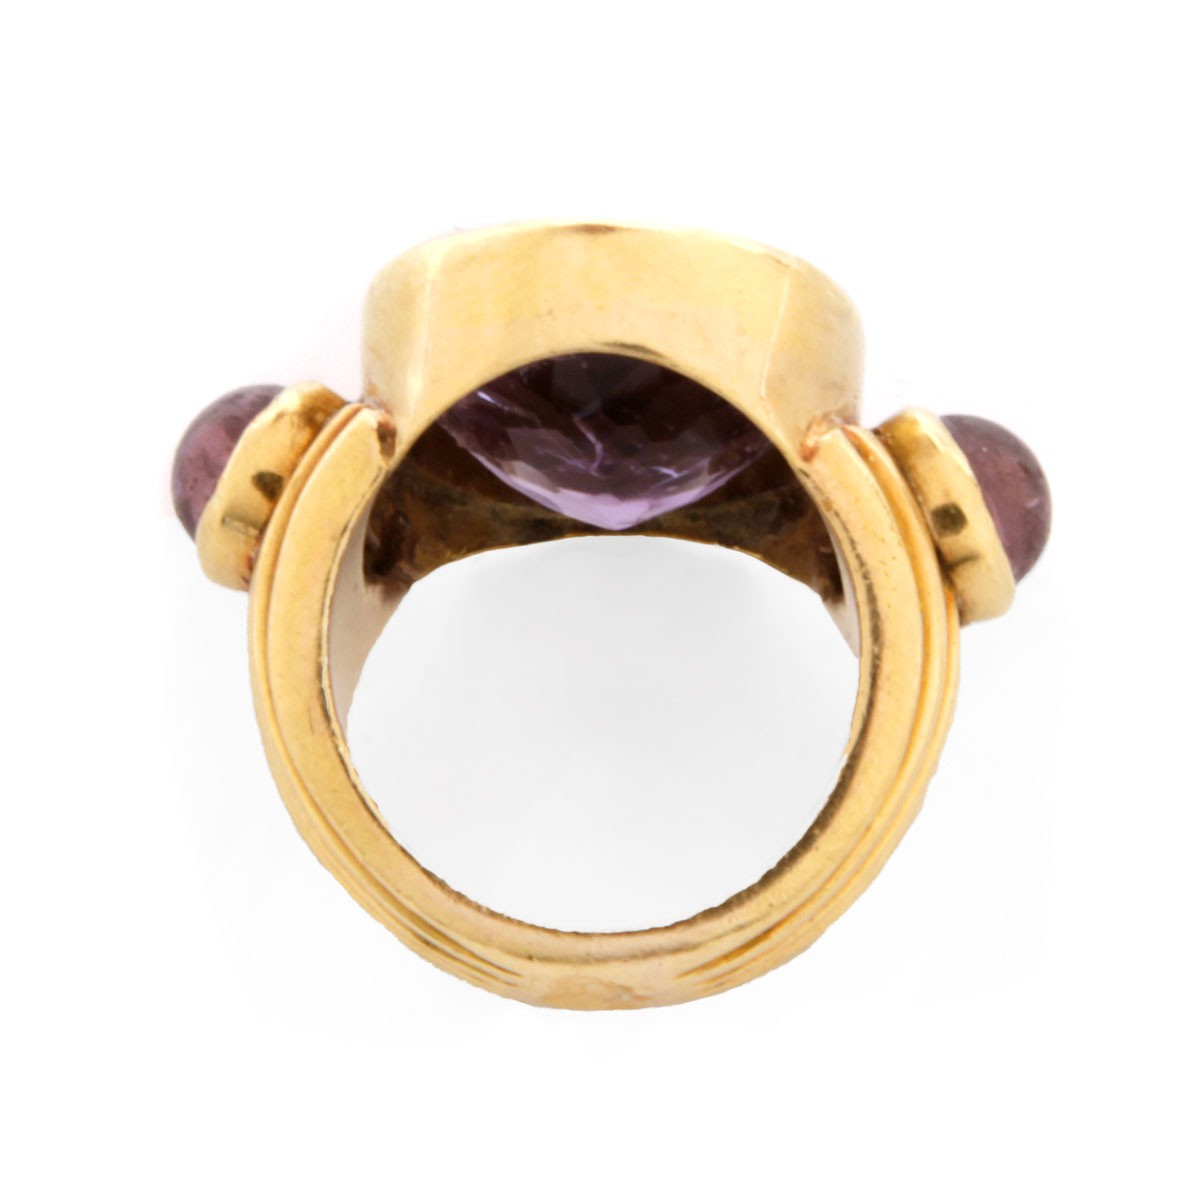 Vintage Amethyst and 18K Ring - Image 4 of 7